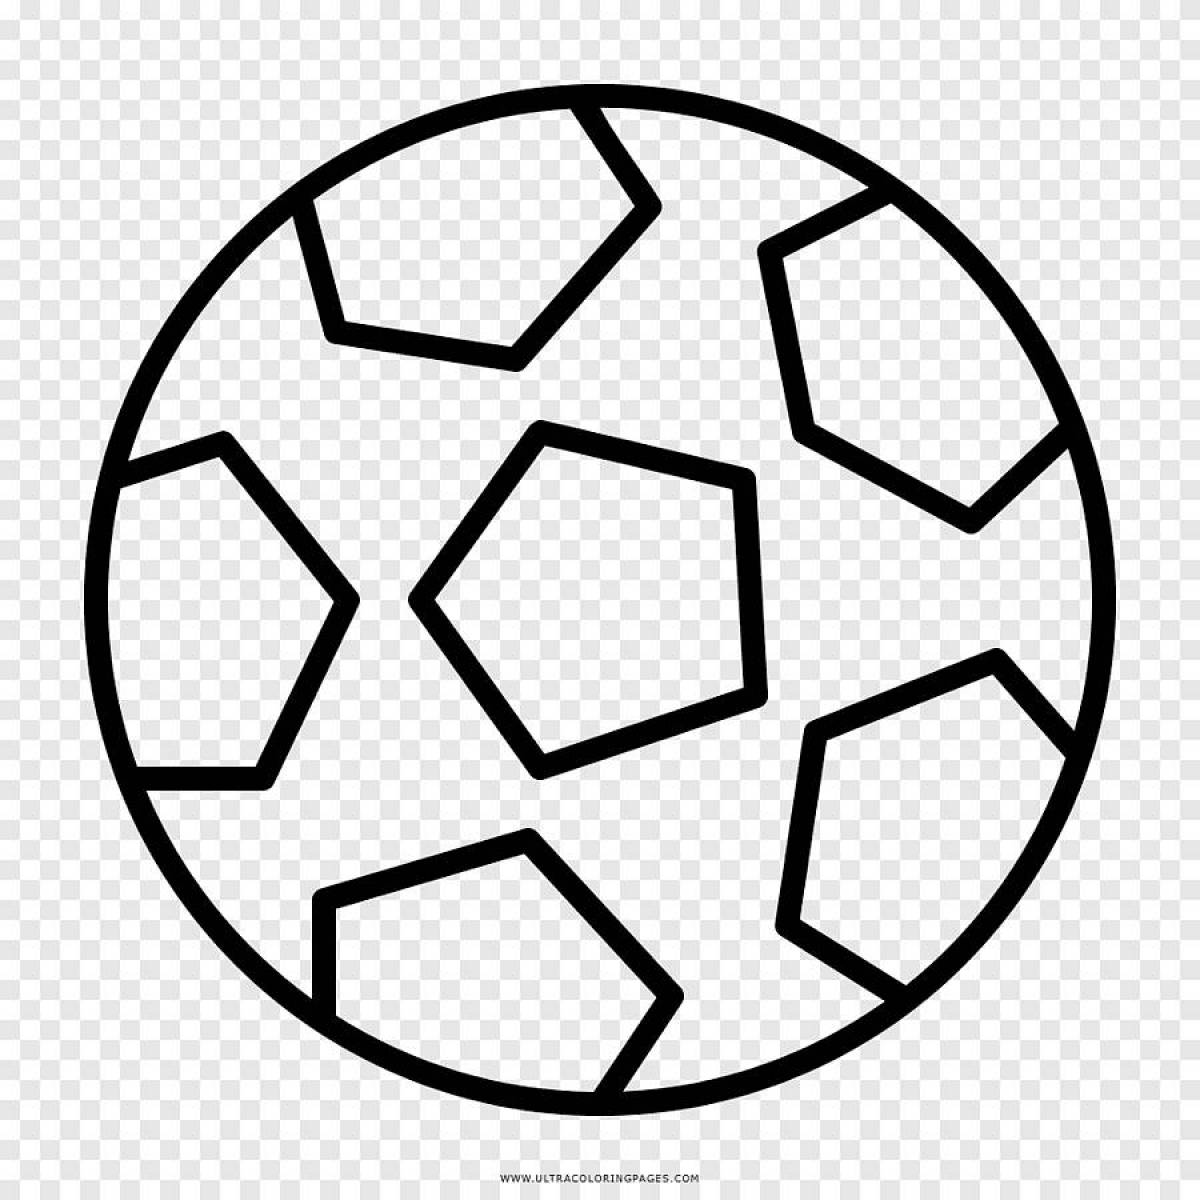 Impressive soccer ball coloring page